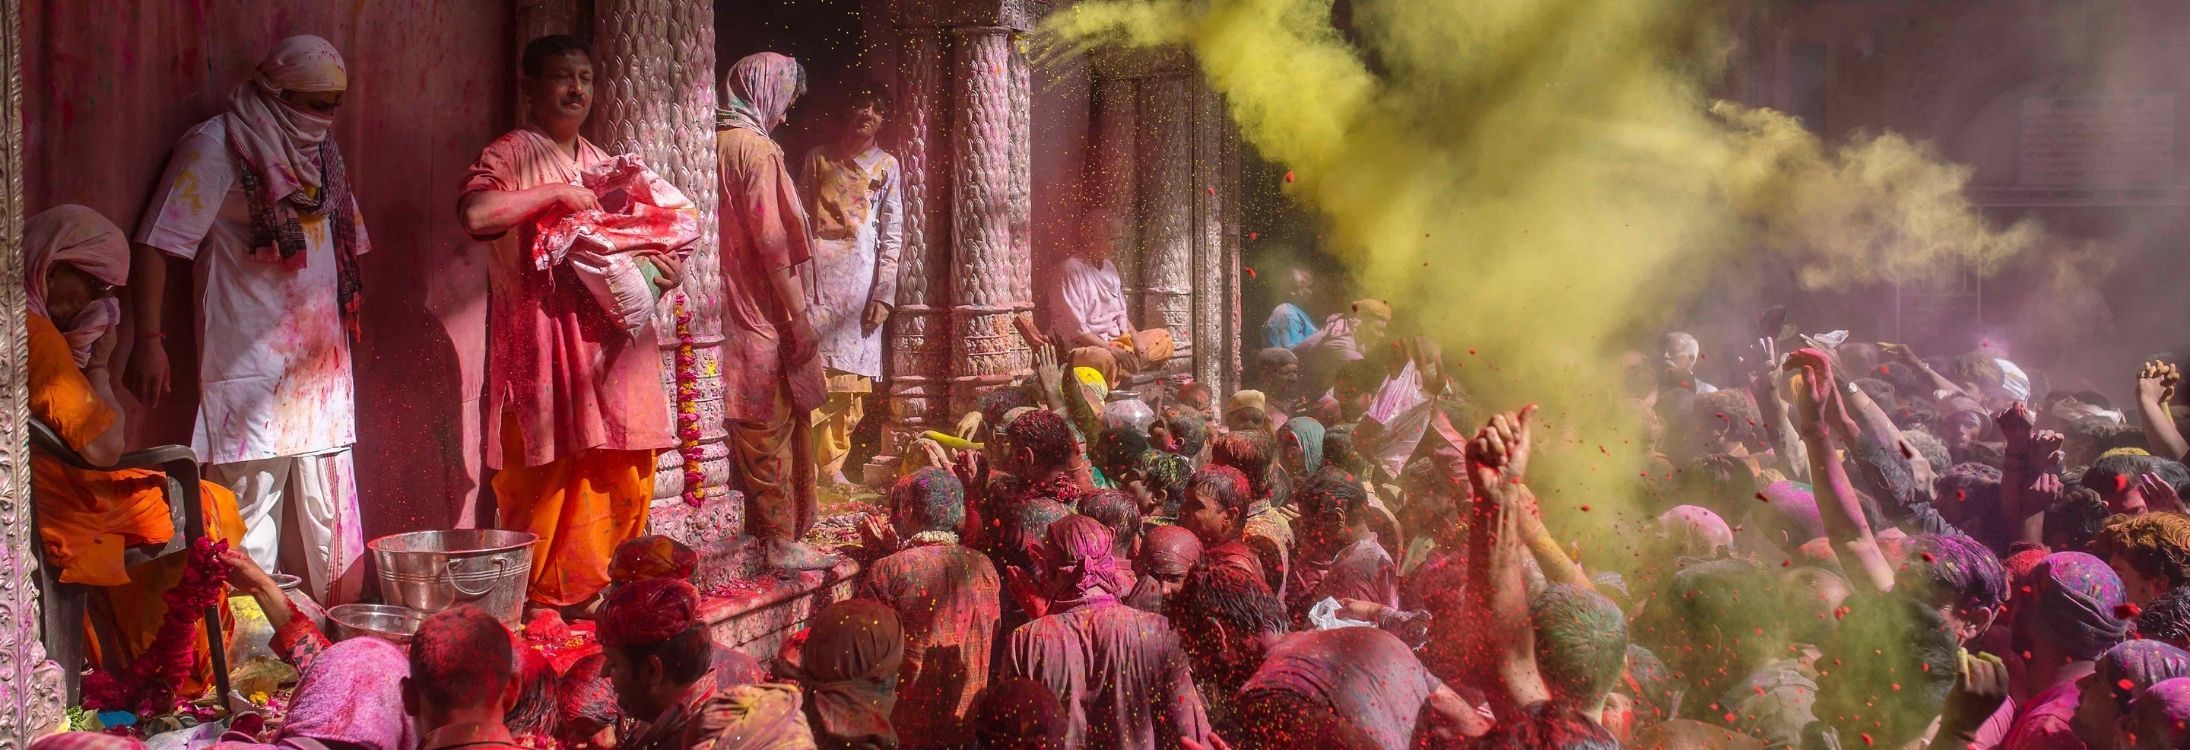 7 Beautiful places to celebrate Holi in India